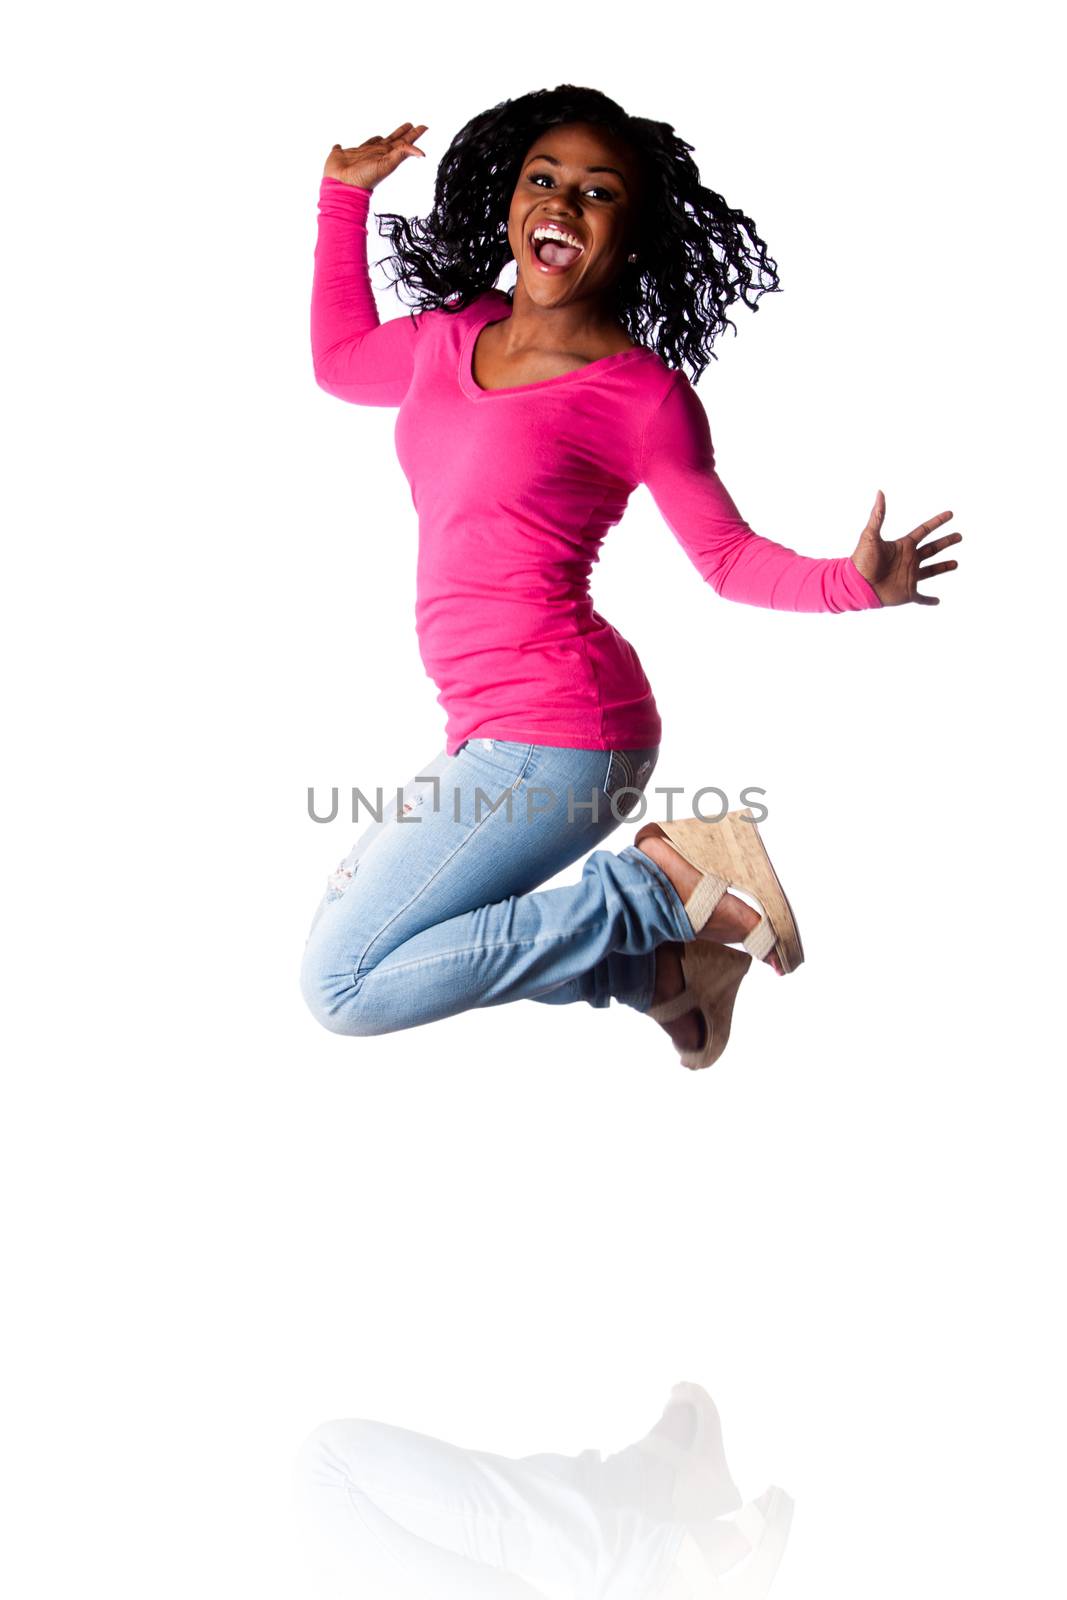 Beautiful young woman jumping of happiness celebrating and cheering, wearing blue jeans and pink shirt.